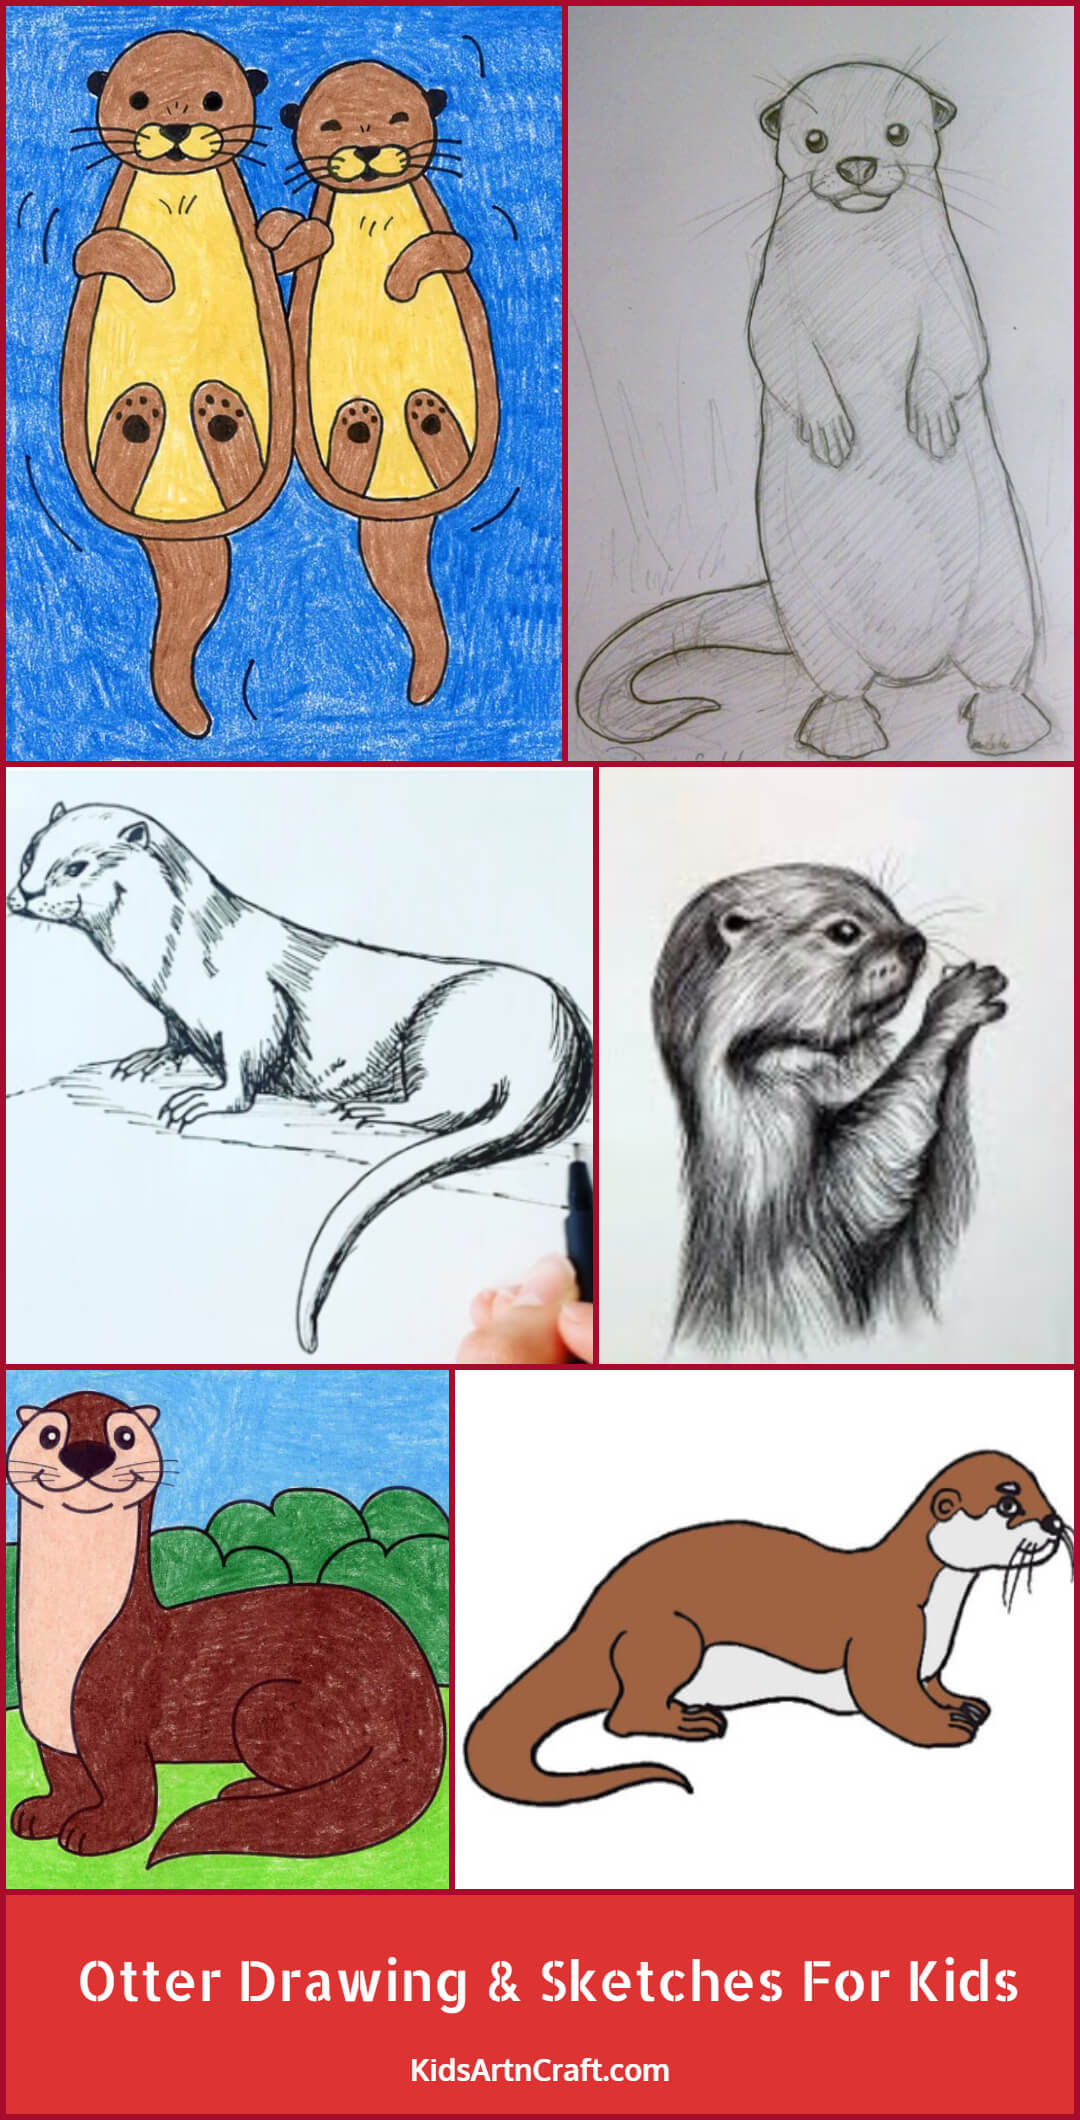 Otter Drawings & Sketches For Kids